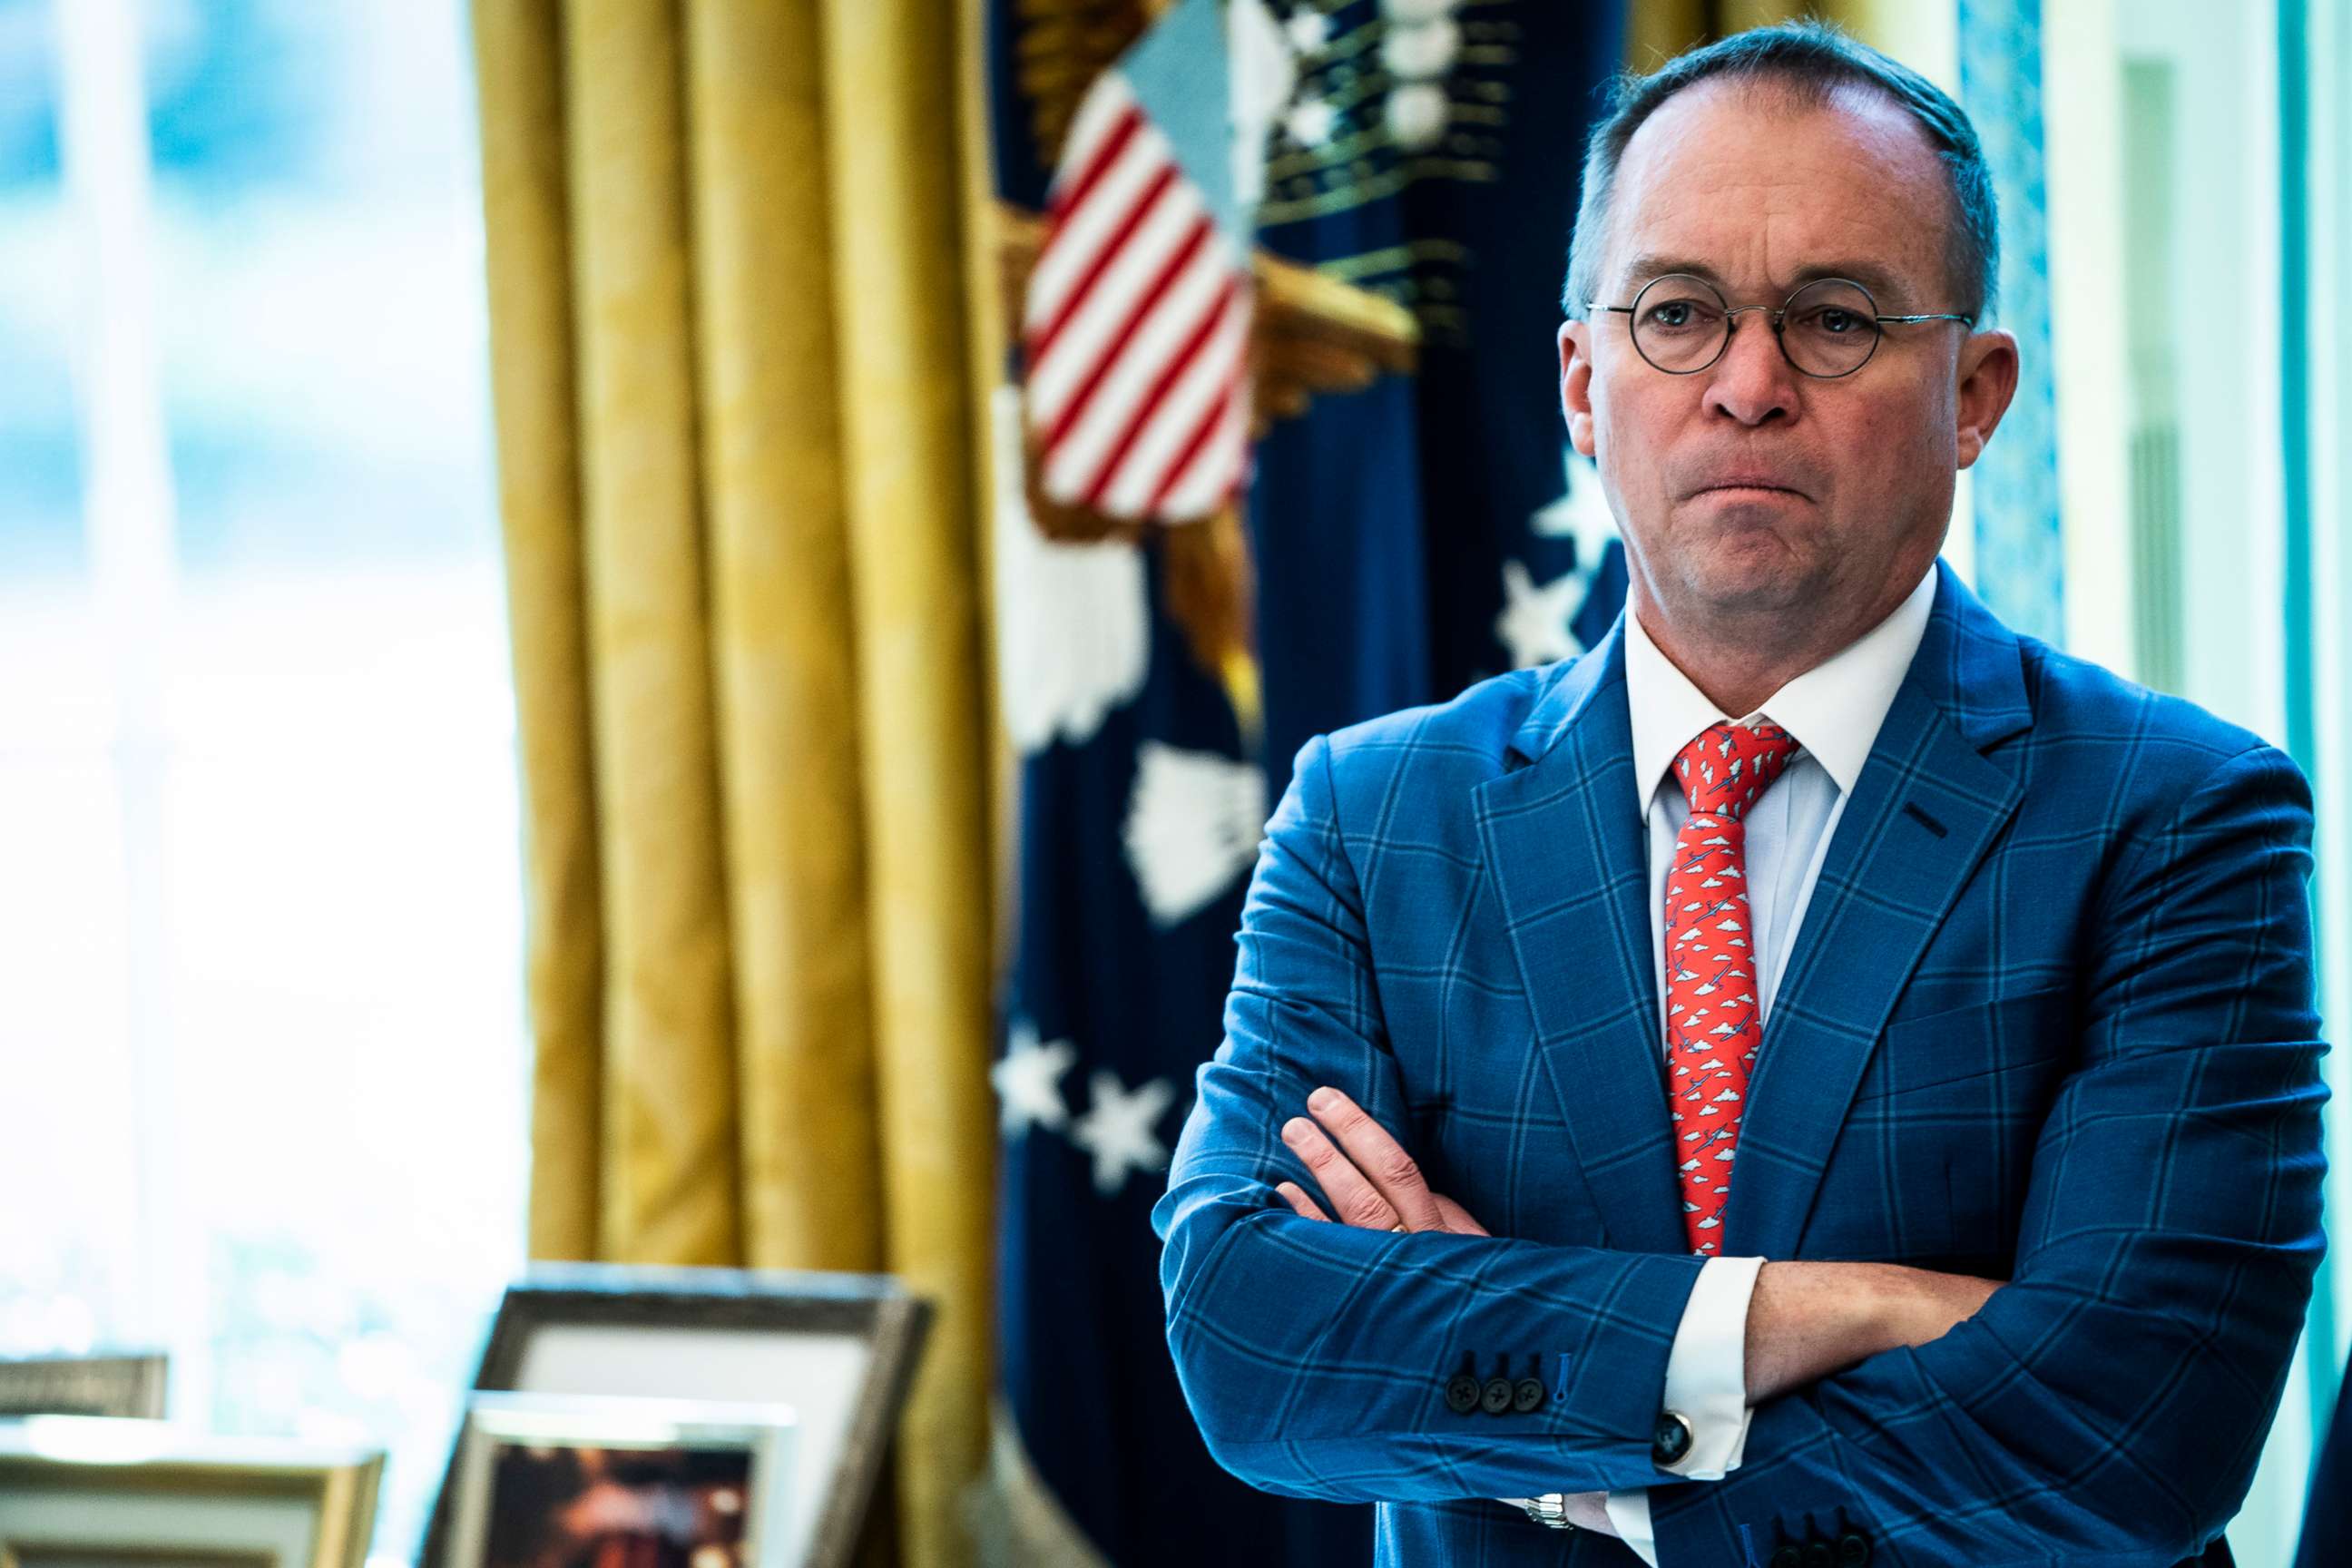 PHOTO: In this March, 2, 2020, file photo, Acting White House Chief of Staff Mick Mulvaney listens as President Donald Trump holds a meeting in the Oval Office at the White House in Washington, DC.